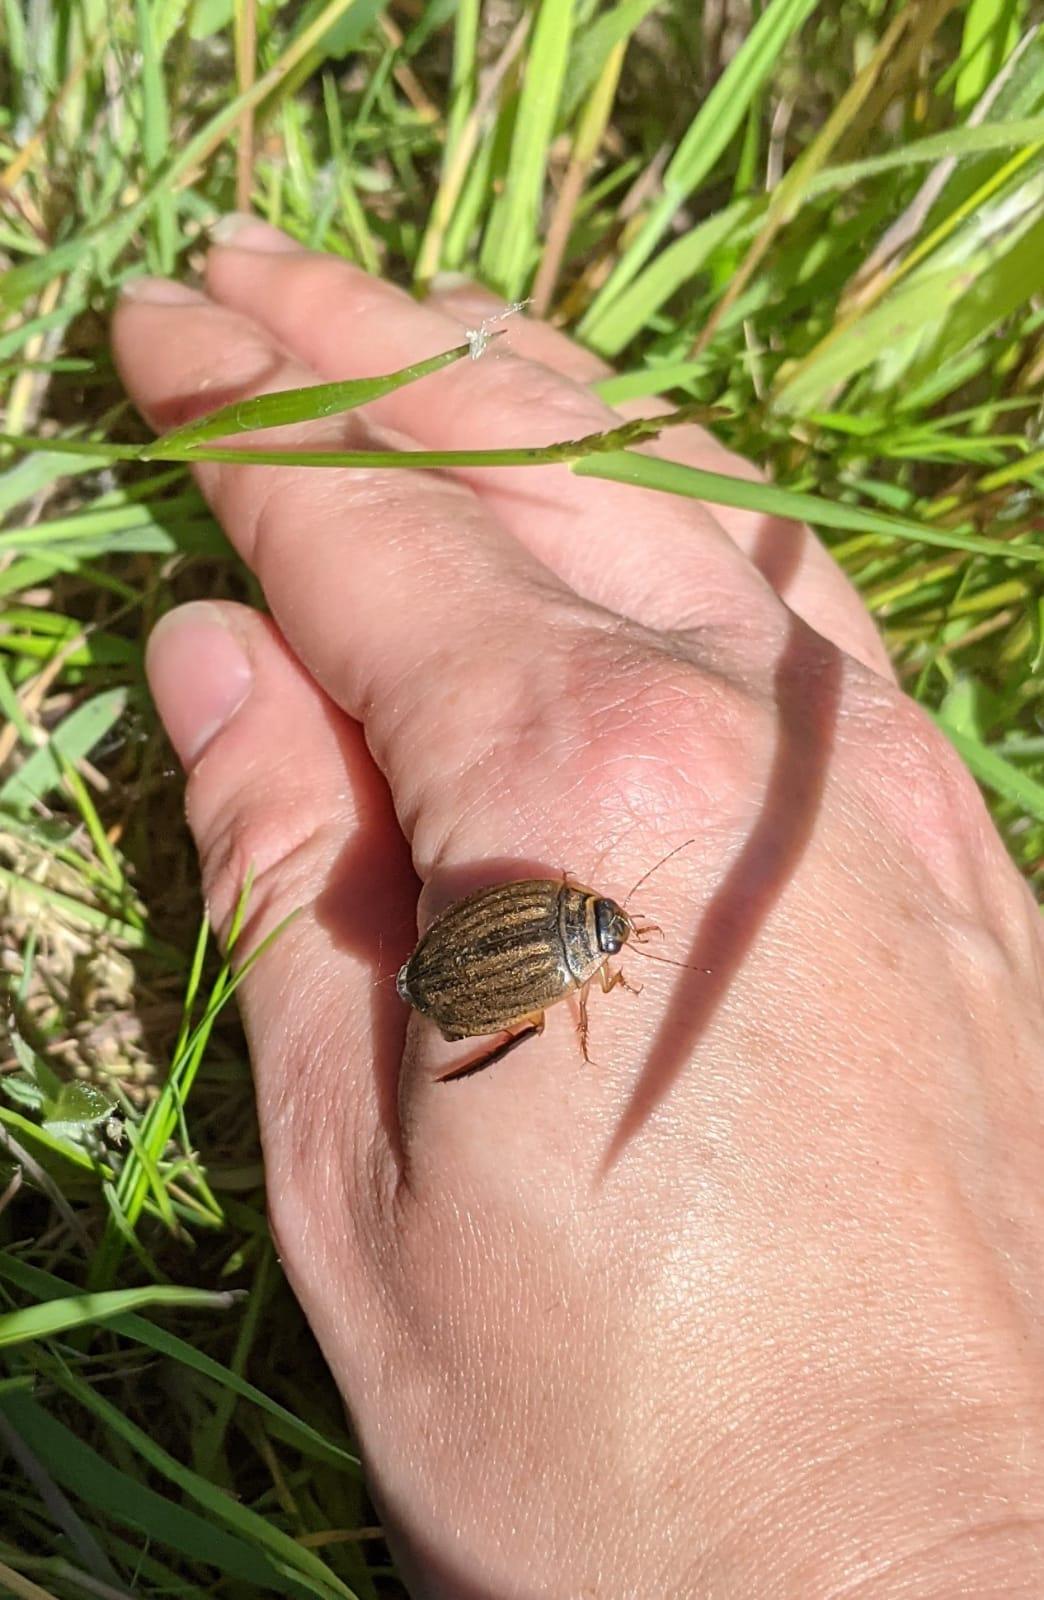 A beetle resting on a hand